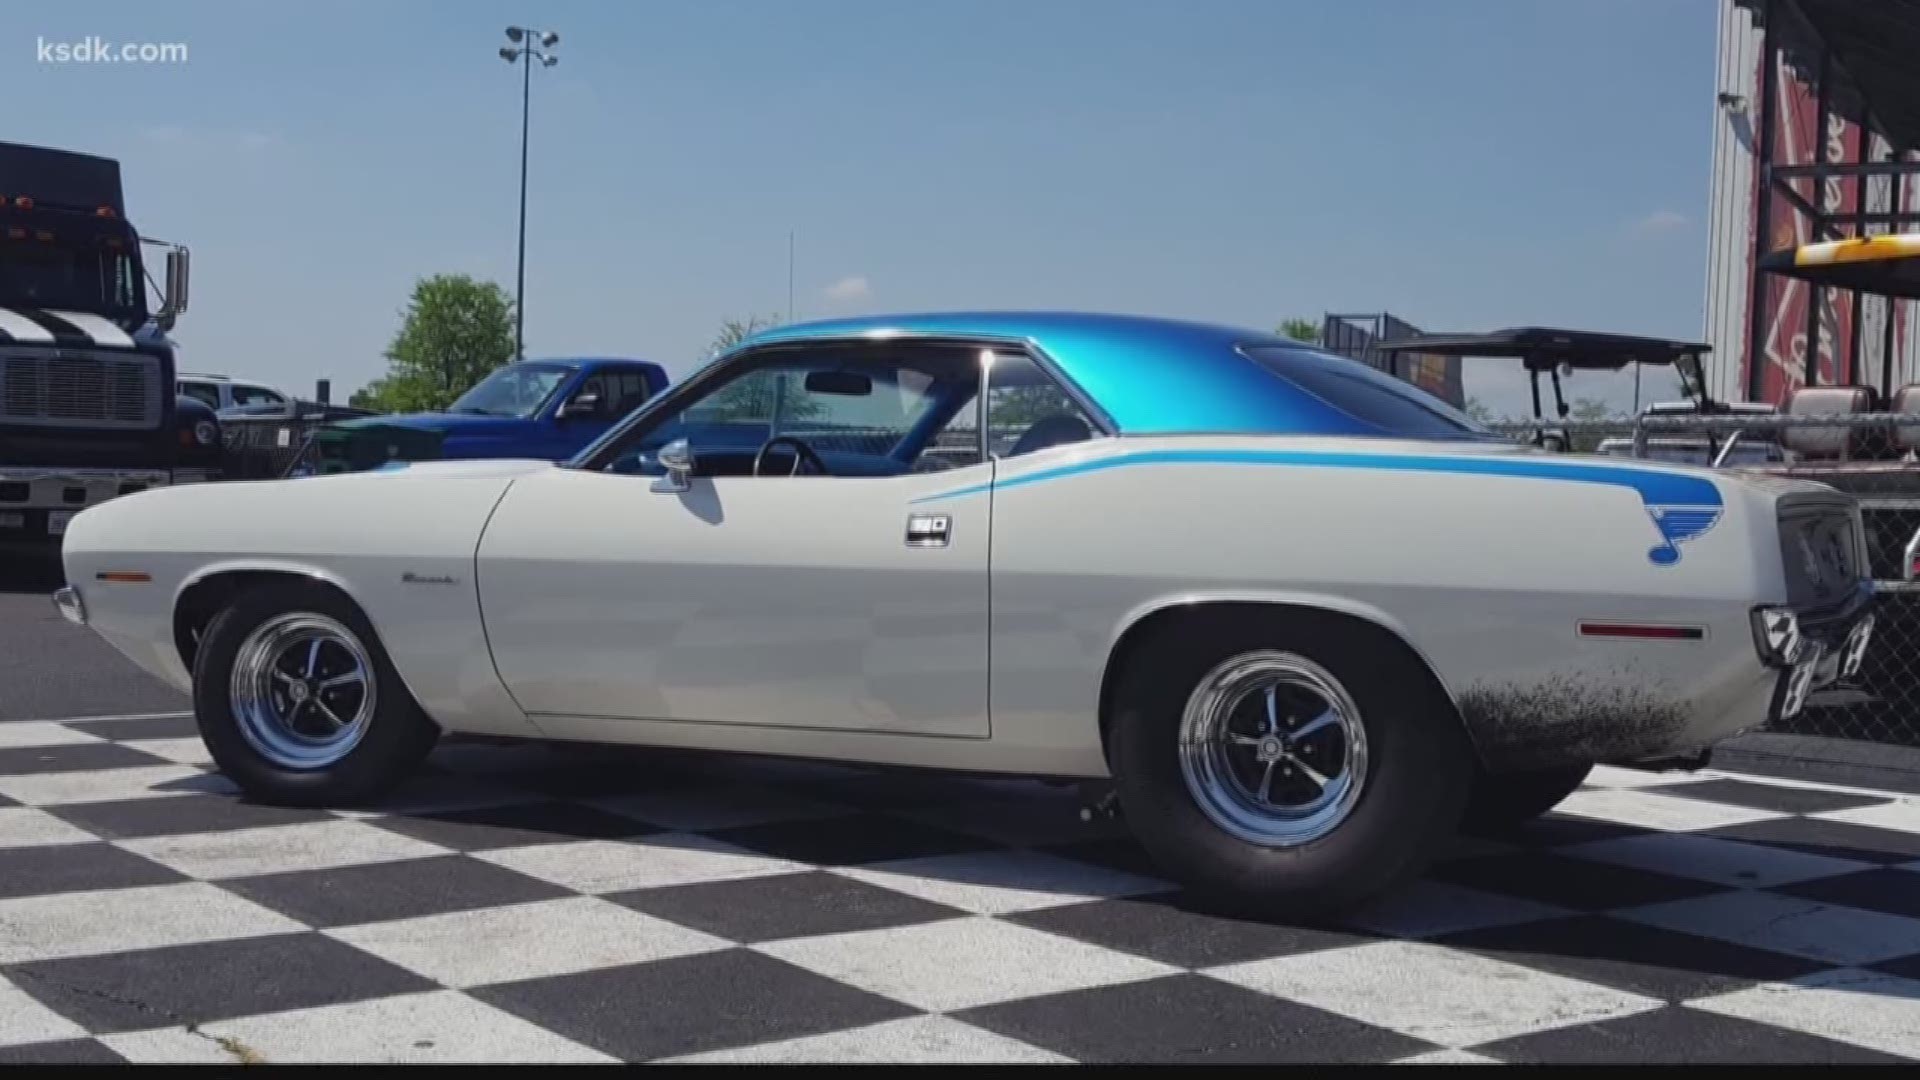 You can buy a St. Louis Blues Barracuda the players drove in 1970